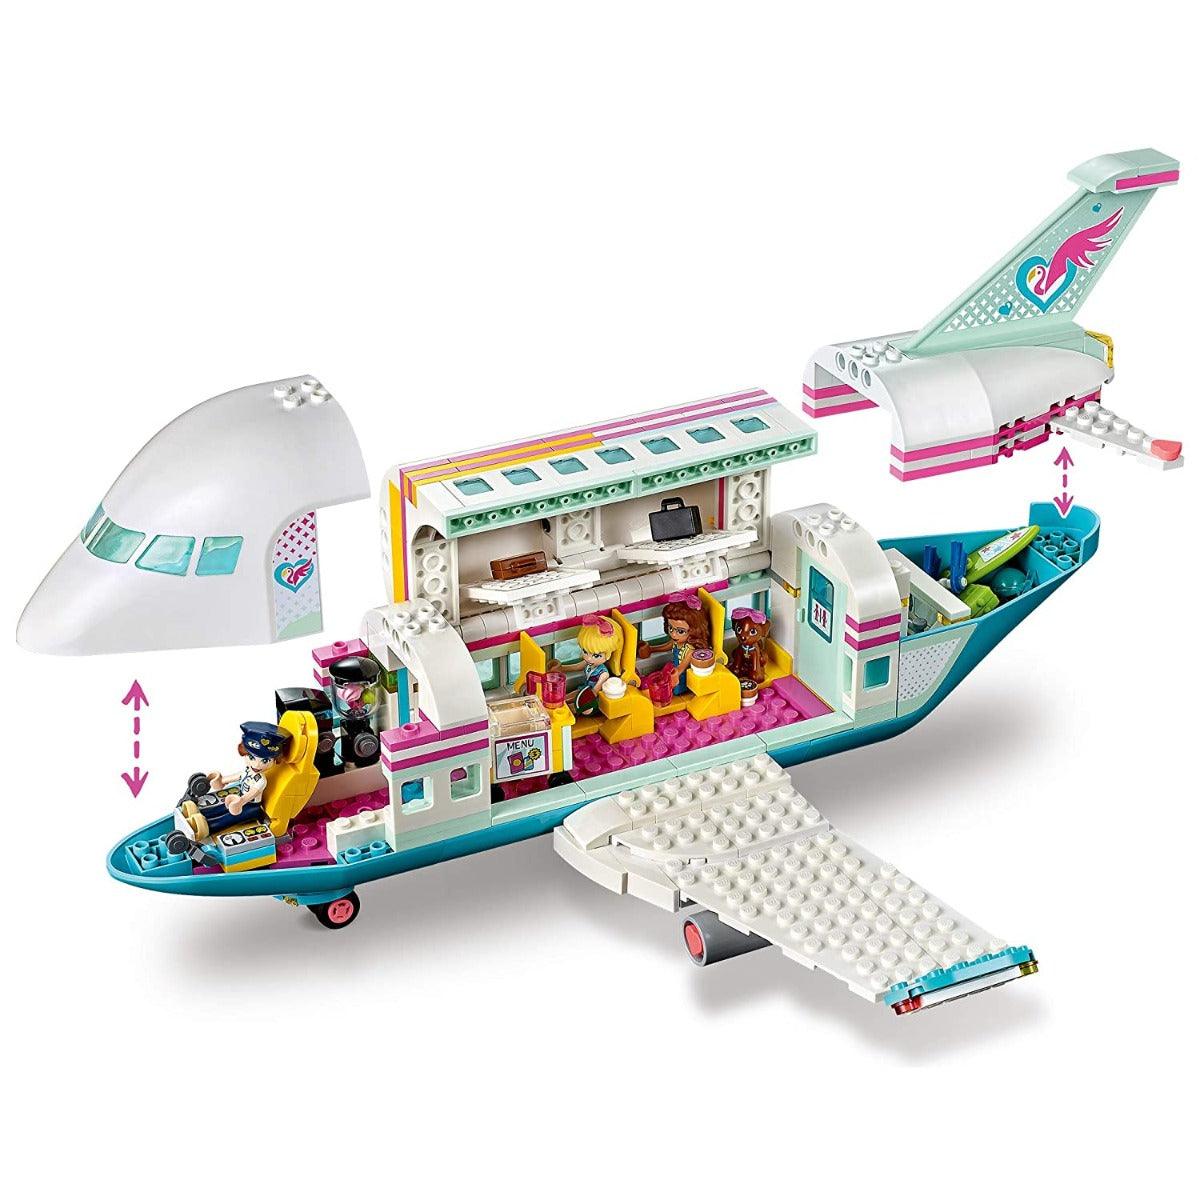 LEGO Friends Heartlake City Airplane 41429 Building Toy Inspires